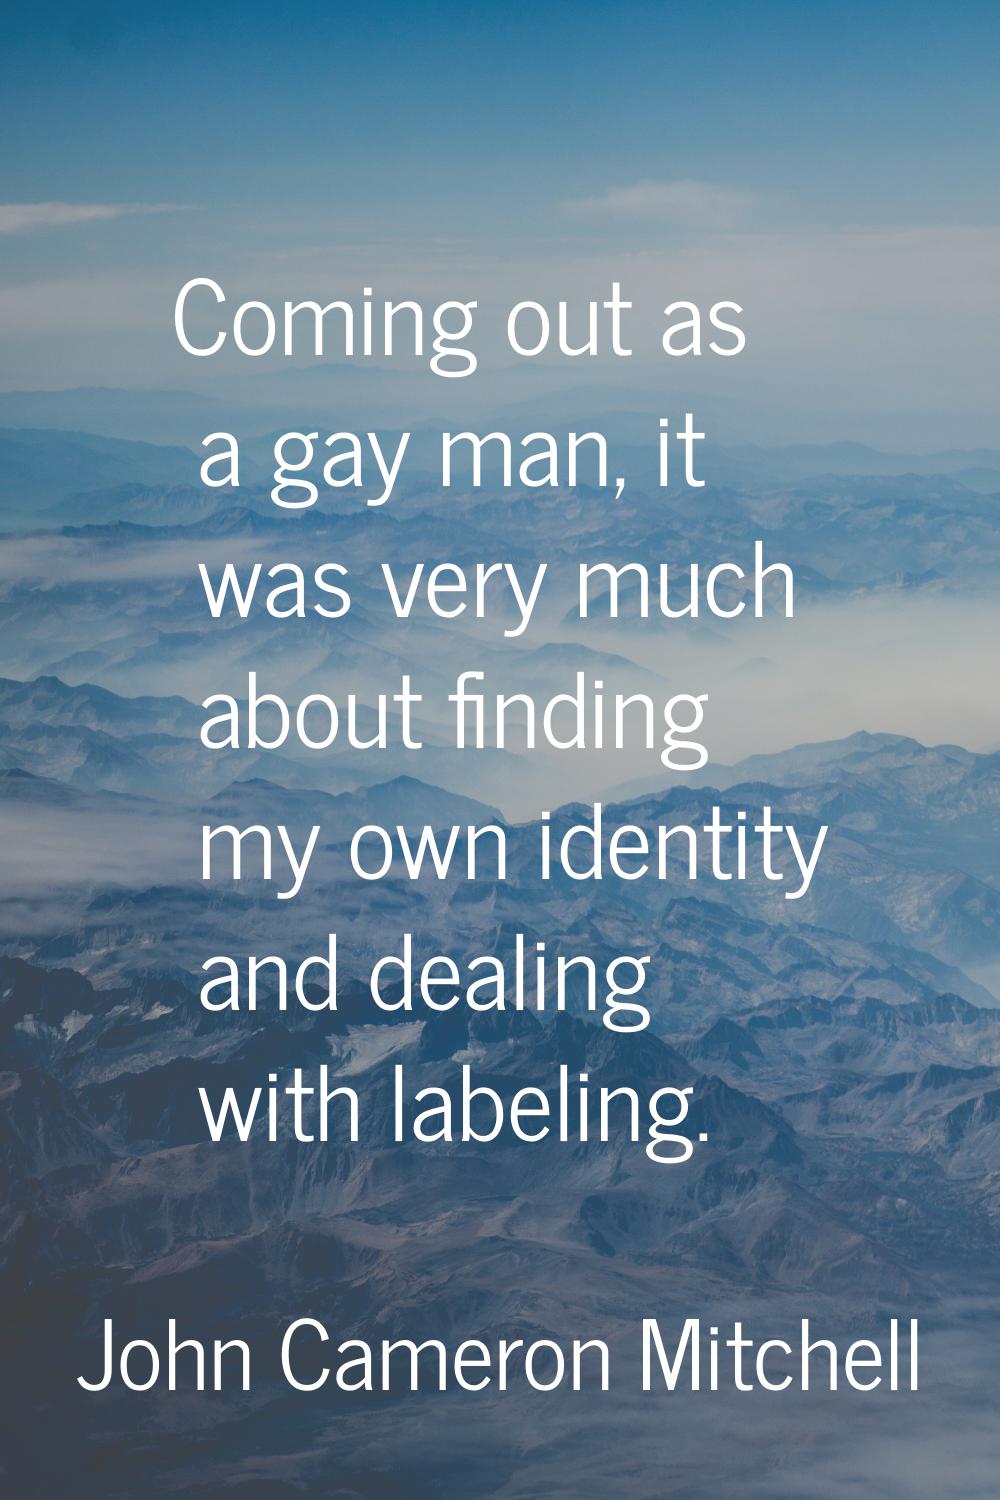 Coming out as a gay man, it was very much about finding my own identity and dealing with labeling.